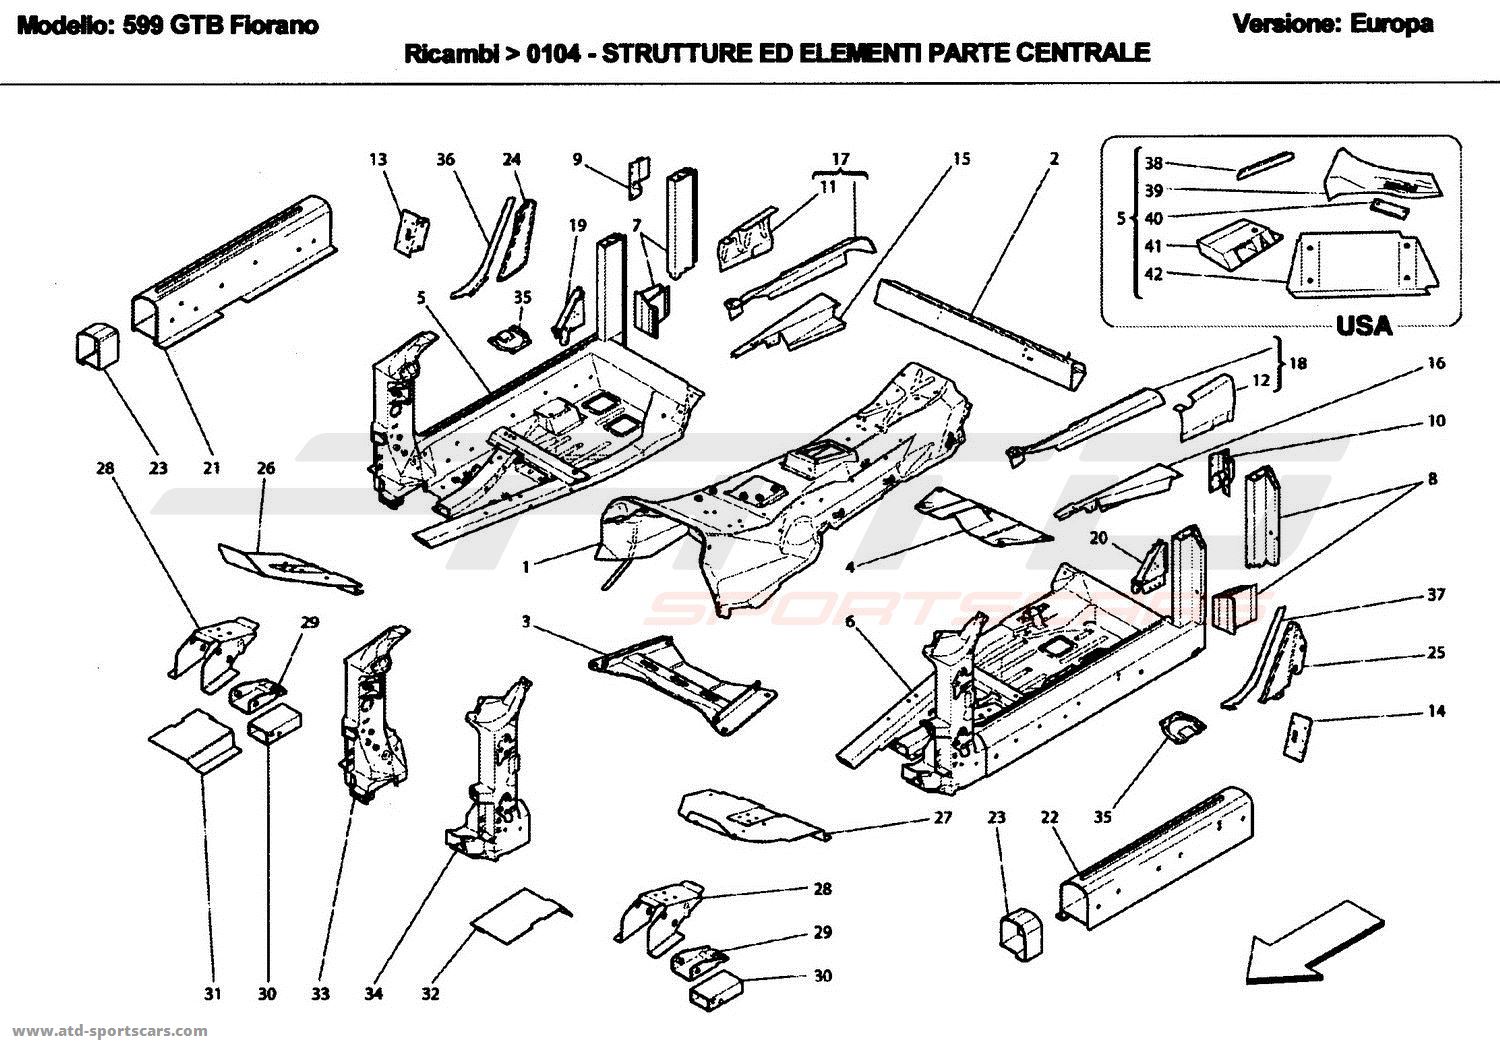 CENTRAL STRUCTURES AND COMPONENTS